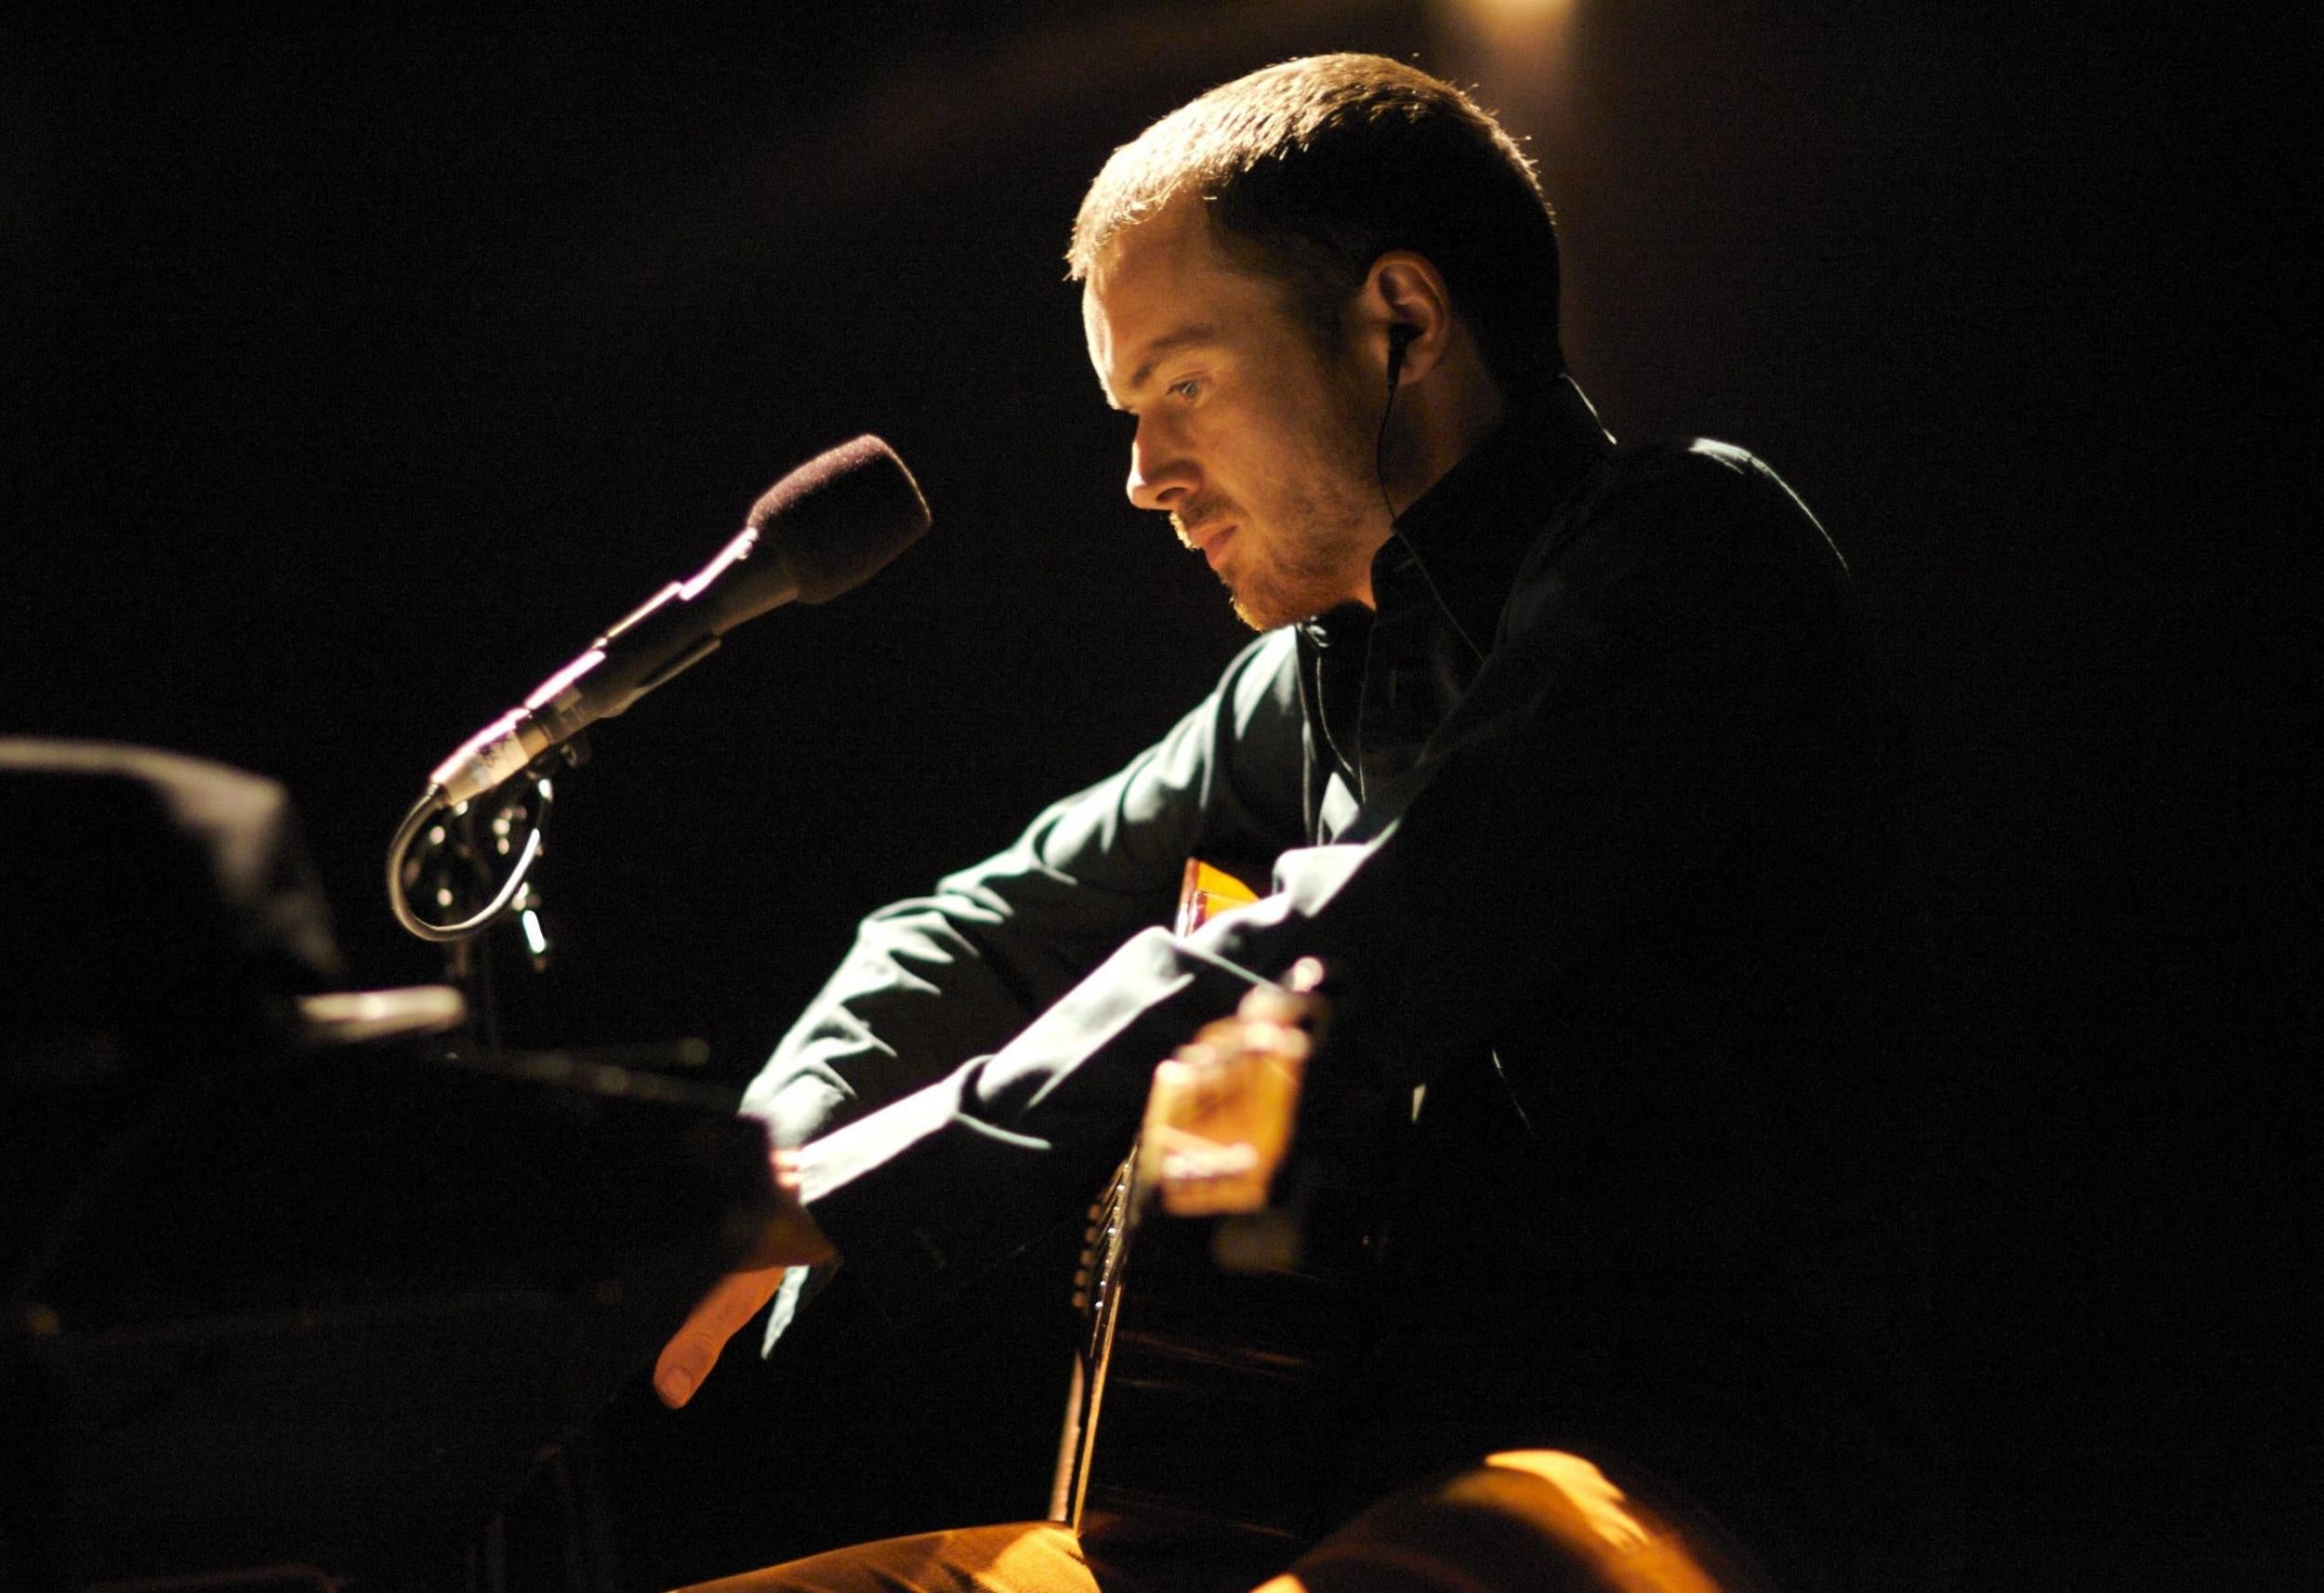 Damien Rice in concert at Cardiff International Arena, 2007